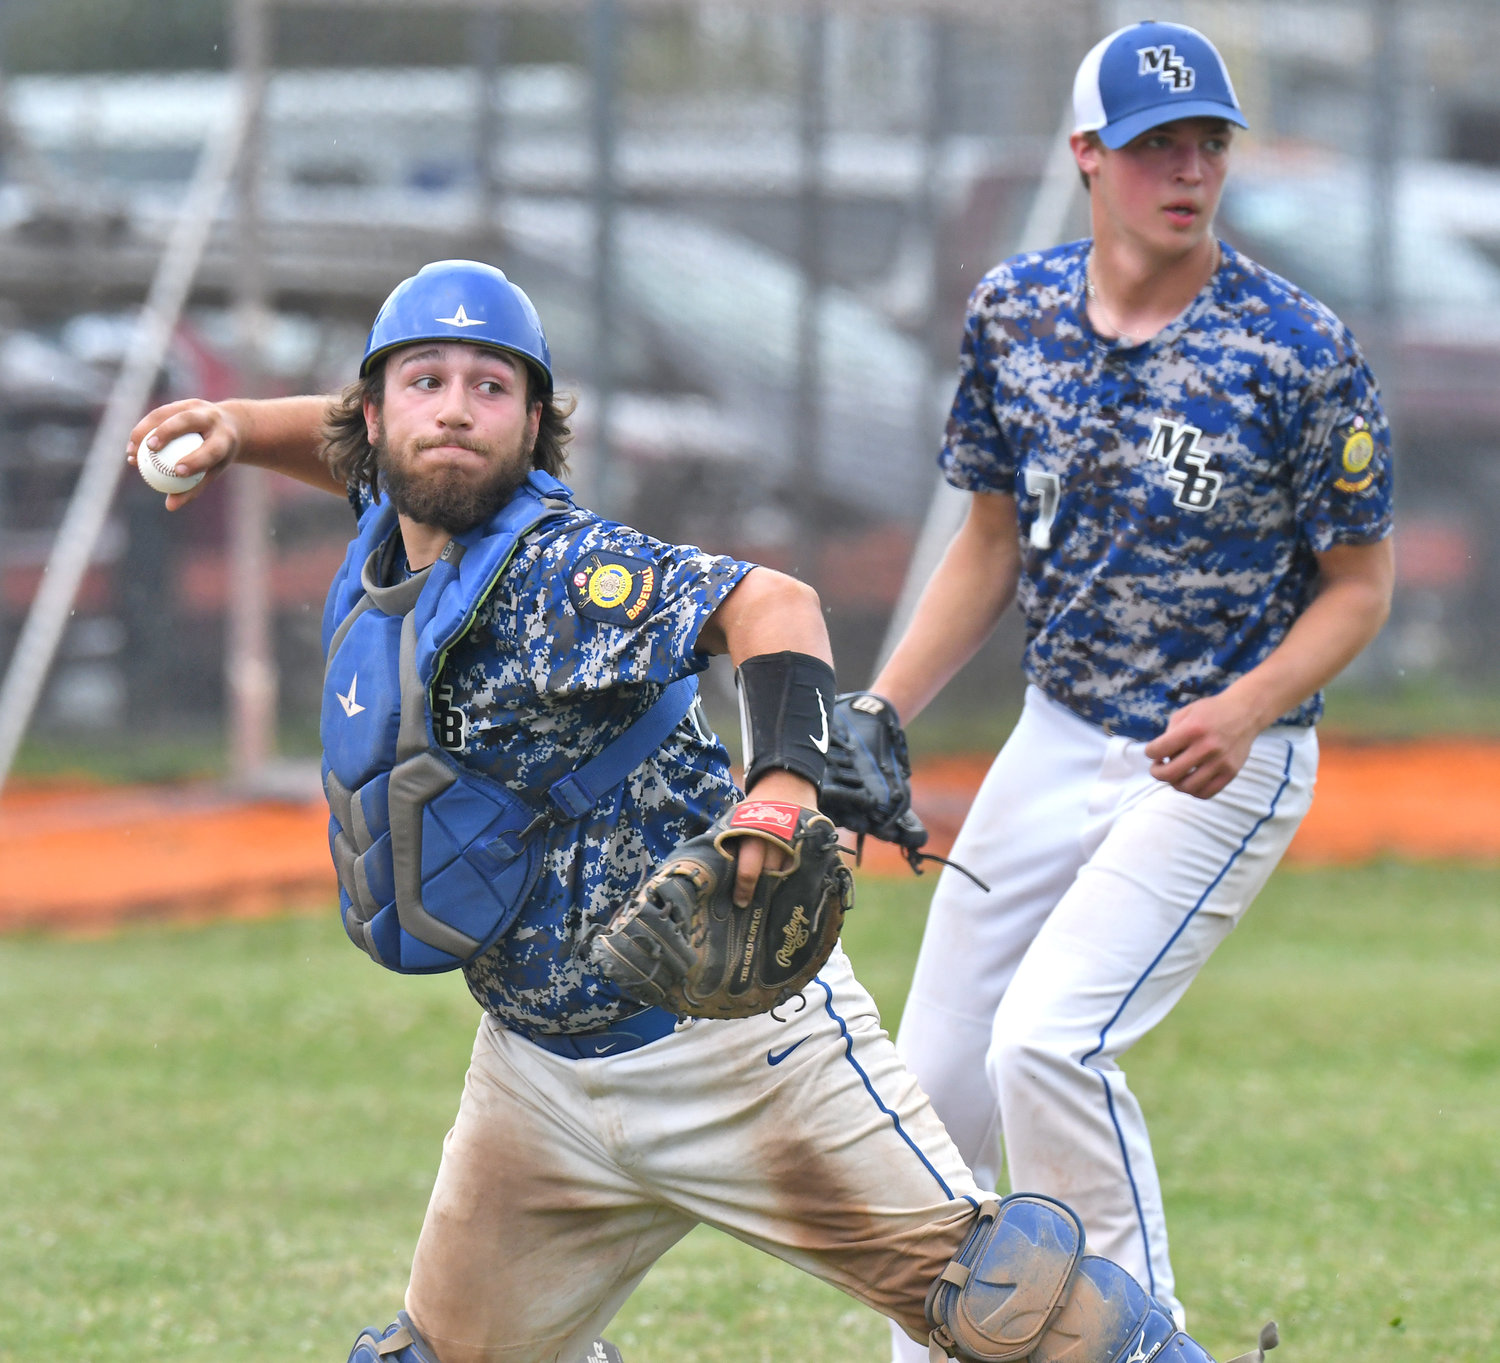 Moran Post catcher Cole Narolis throws to first base to retire Smith Post batter Kyle Williamson as pitcher Elijah Ciani looks on. The Camden-based team lost 5-4 on the road in the first round of the District V American Legion double-elimination baseball tournament.